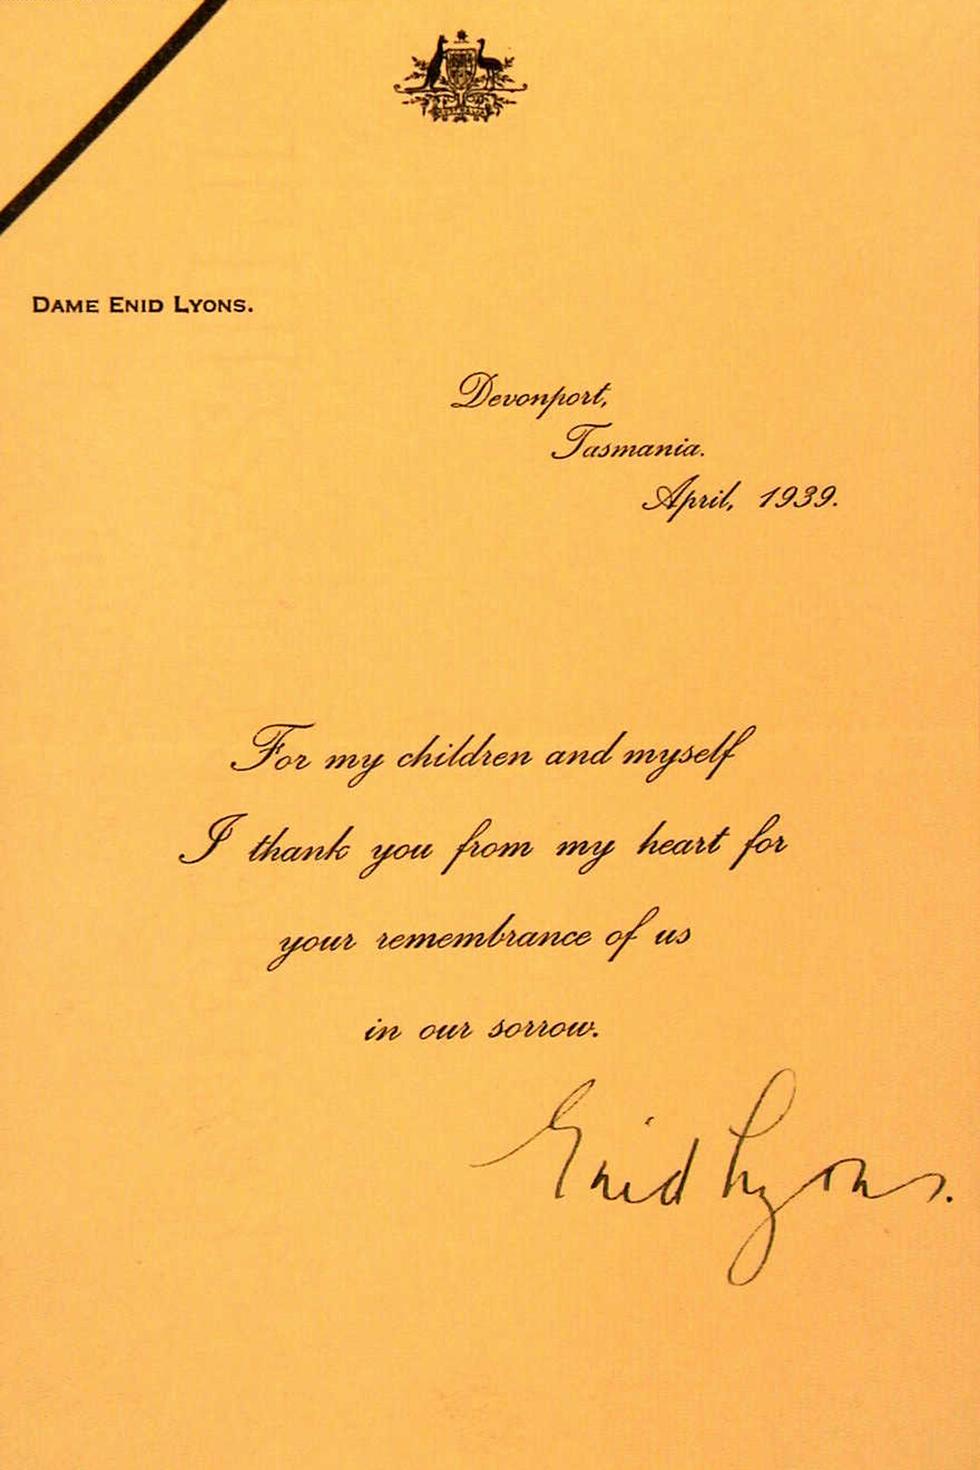 Dame Enid Lyons’ reply to the condolences of former Prime Minister Joseph Cook on the death of Joseph Lyons.